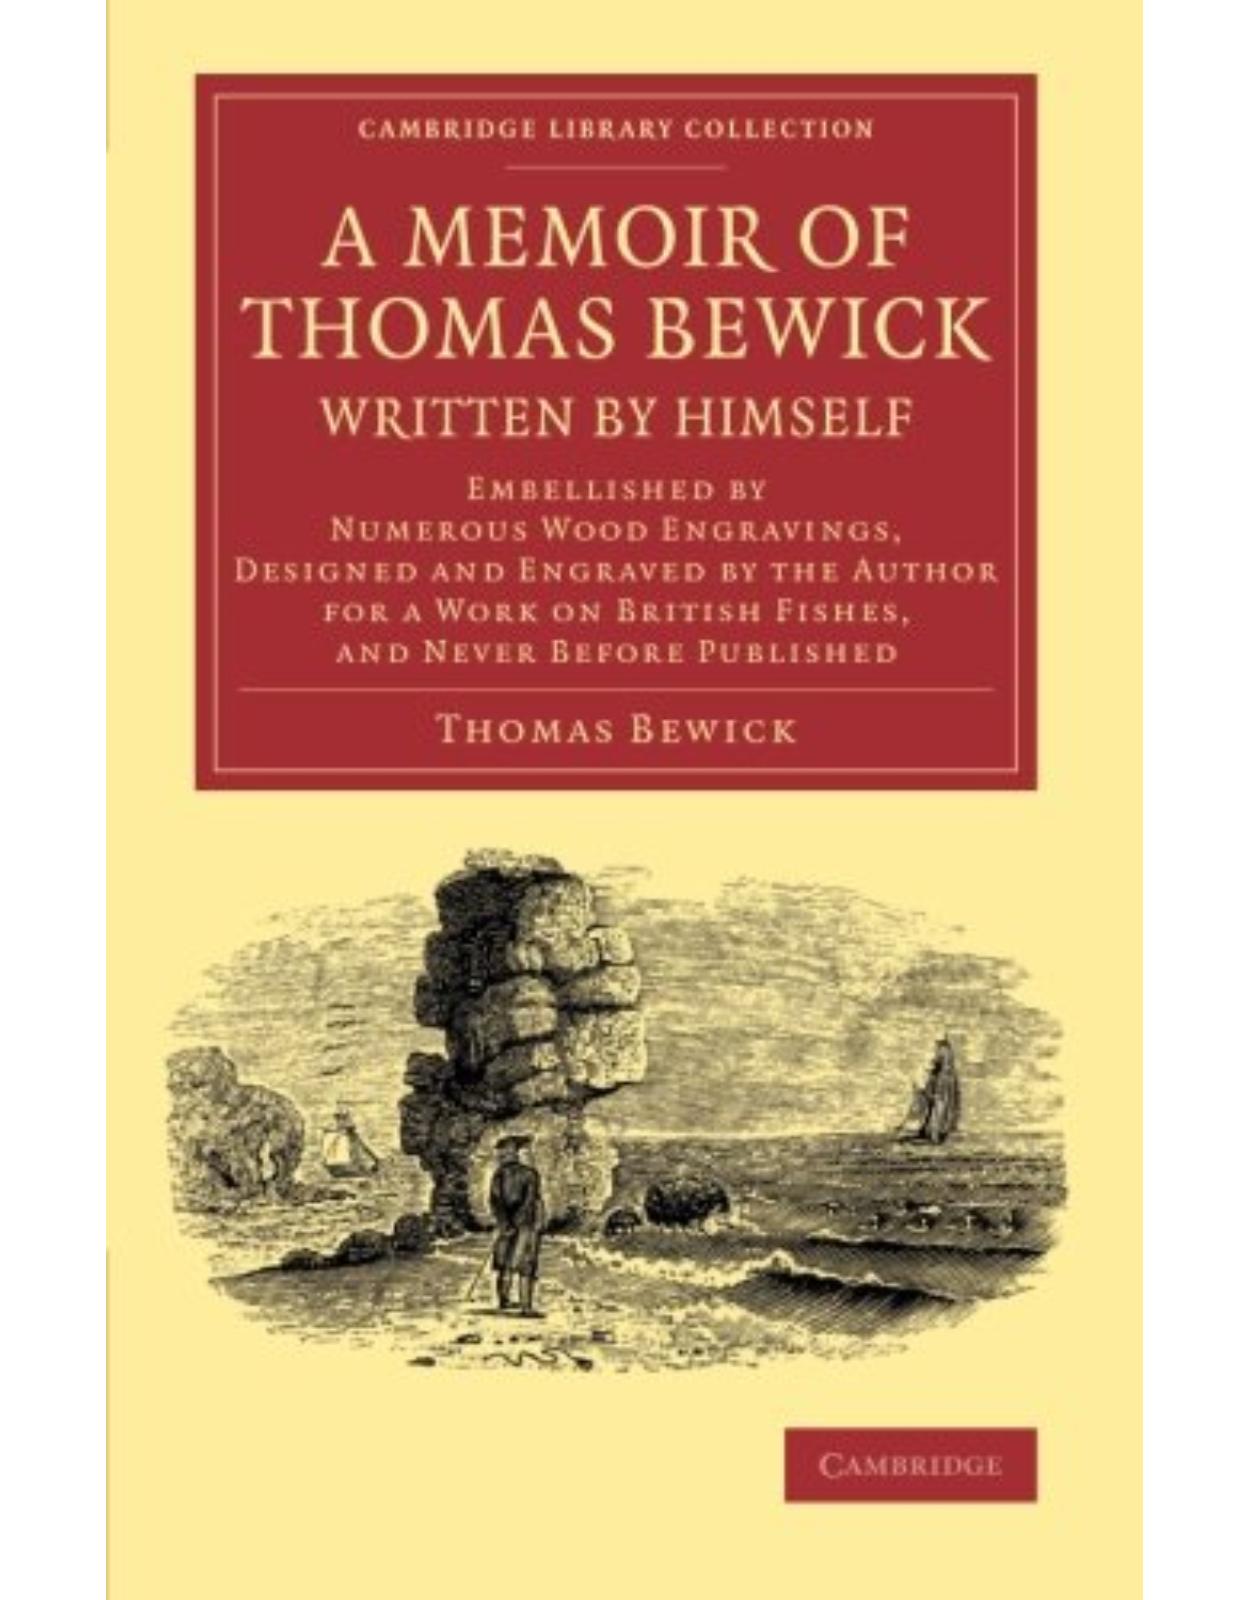 A Memoir of Thomas Bewick Written by Himself: Embellished by Numerous Wood Engravings, Designed and Engraved by the Author for a Work on British Fishes, and Never before Published